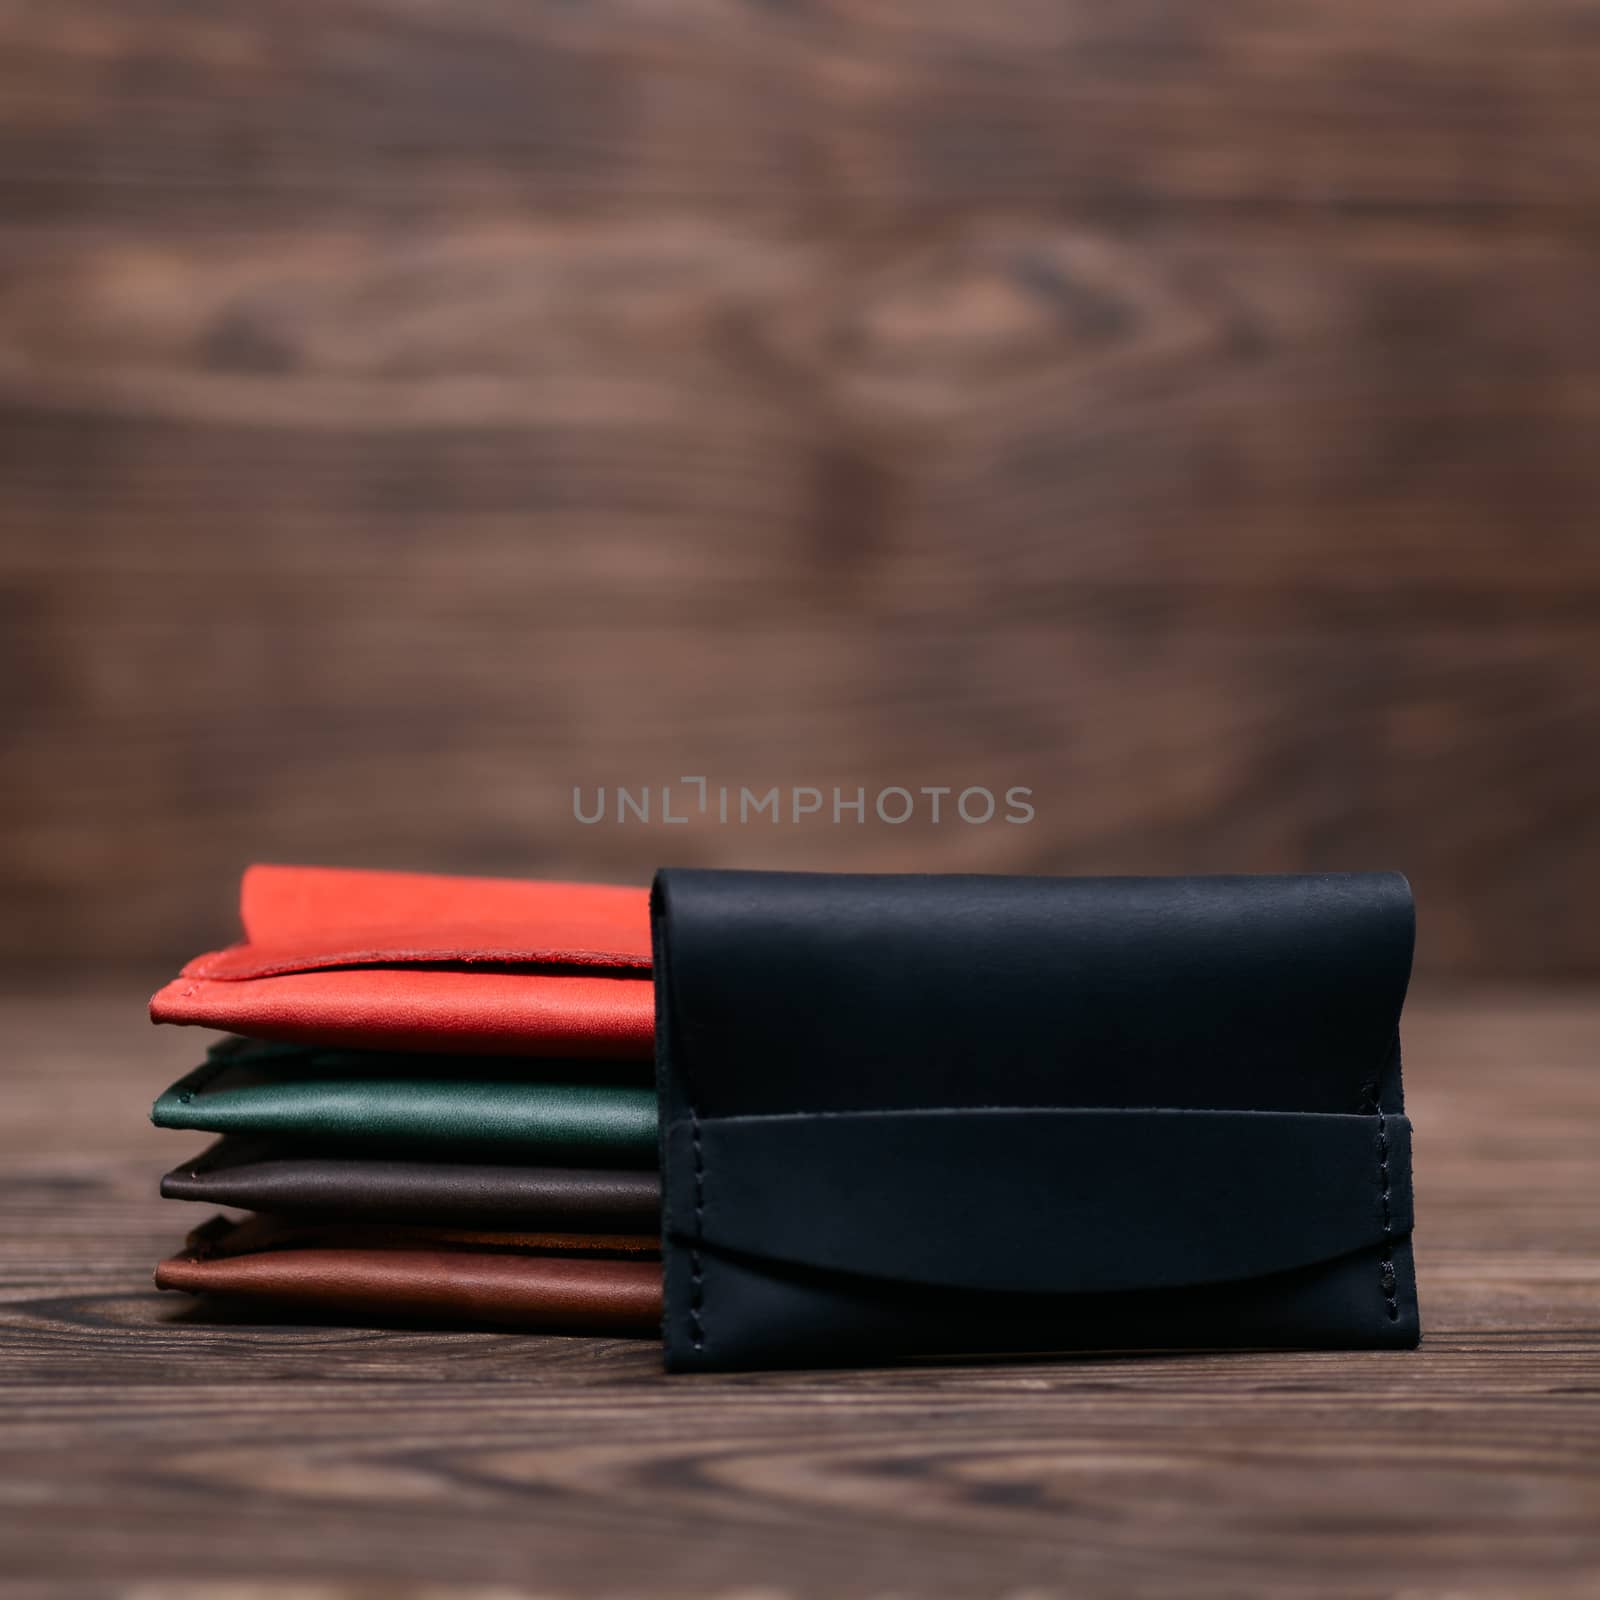 Flat lay photo of five different colour handmade leather one pocket cardholders. Black cardholder on foreground. Red, black, blown, ginger and green colors. Stock photo on wooden background.